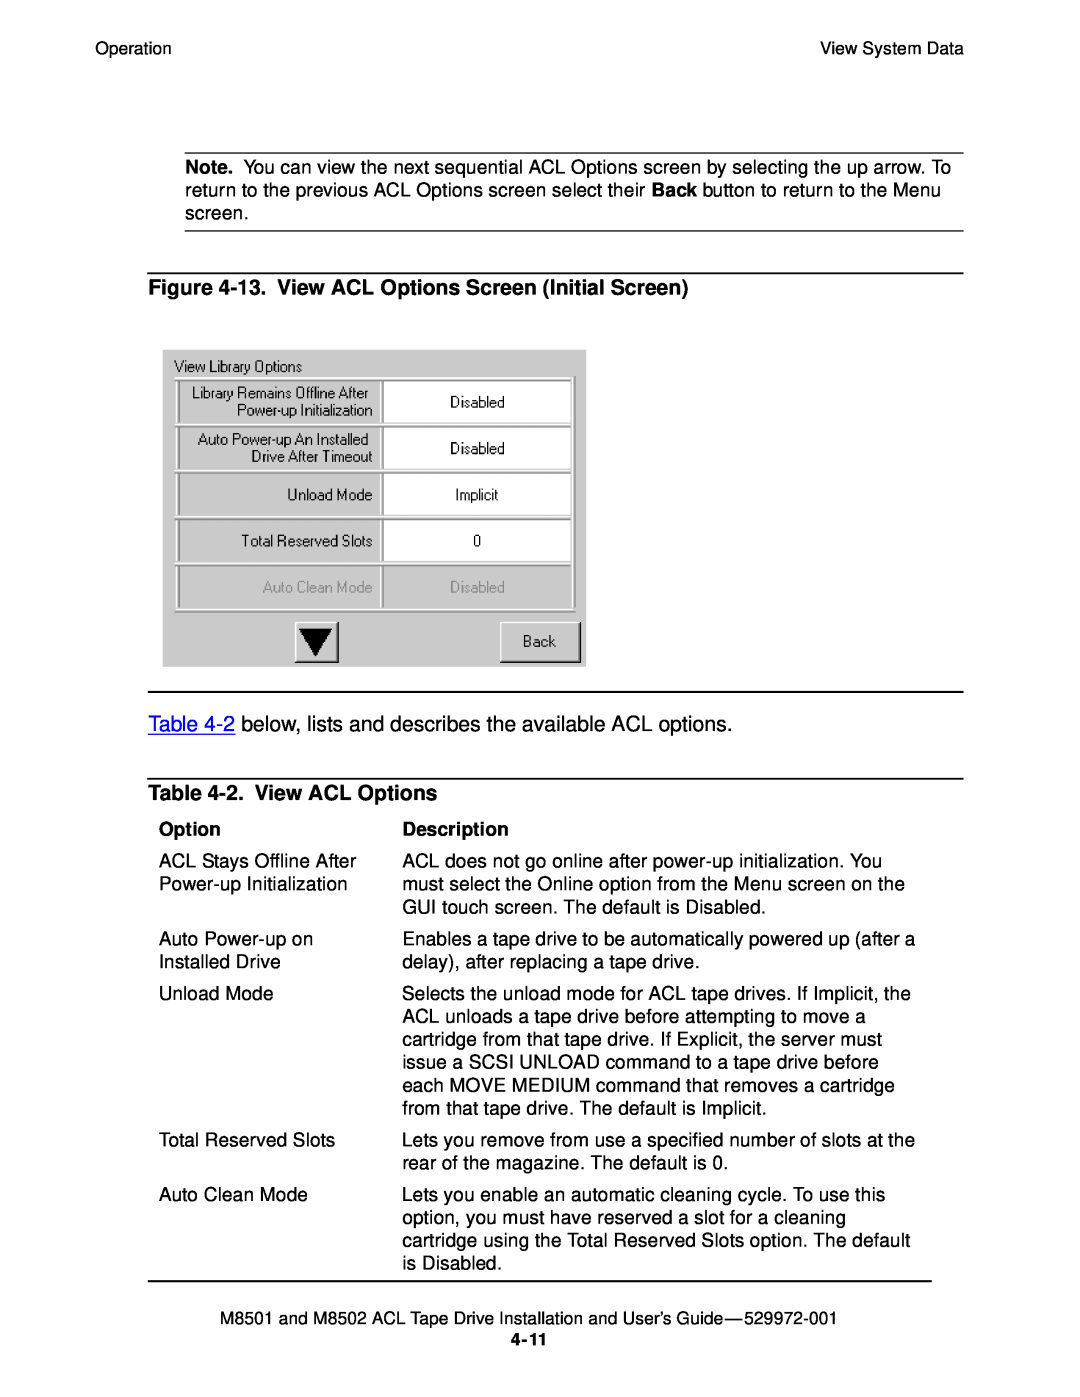 SMC Networks M8501 manual 13. View ACL Options Screen Initial Screen, 2. View ACL Options 